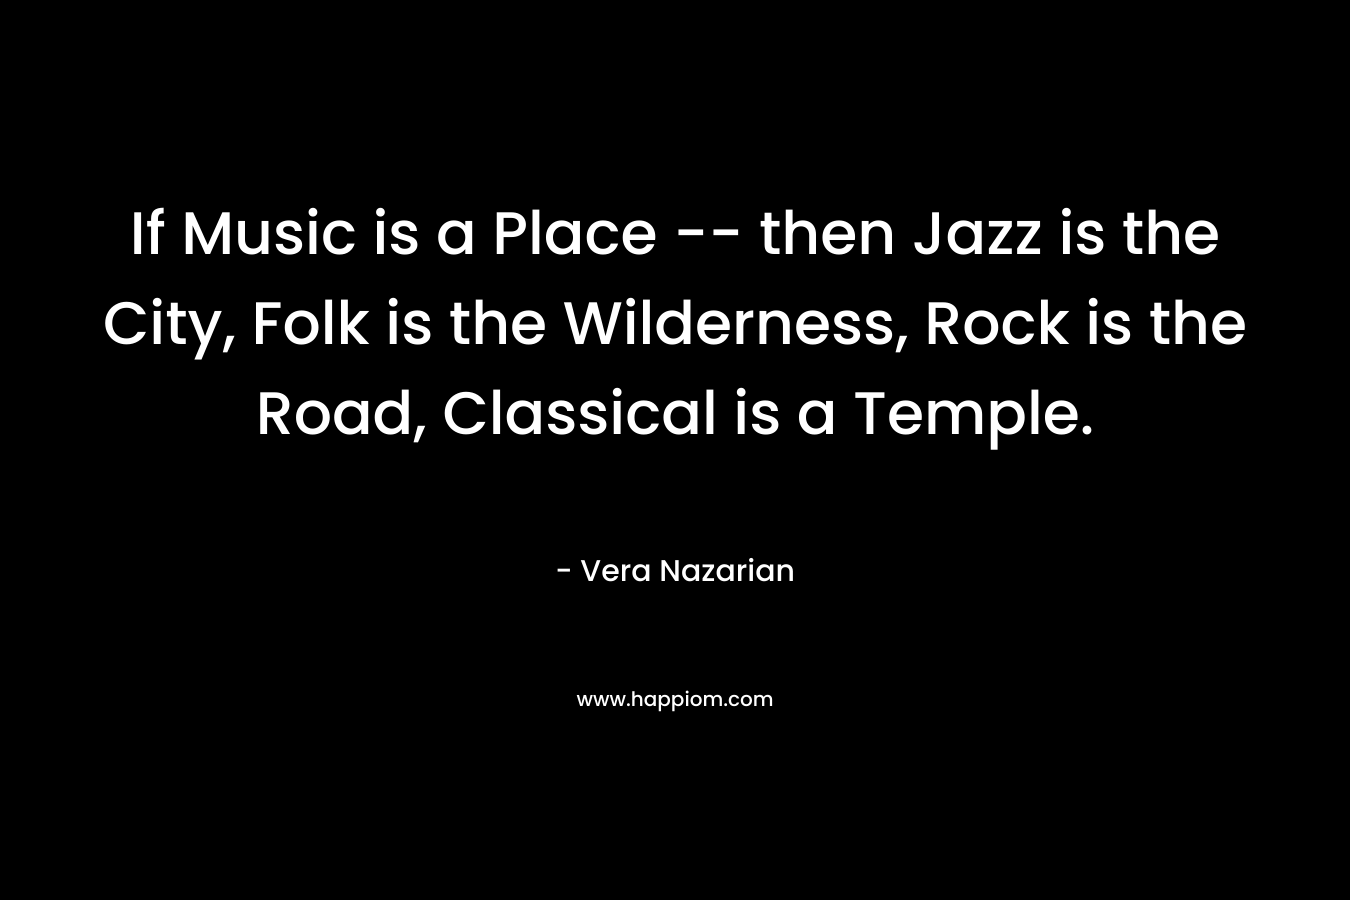 If Music is a Place — then Jazz is the City, Folk is the Wilderness, Rock is the Road, Classical is a Temple. – Vera Nazarian